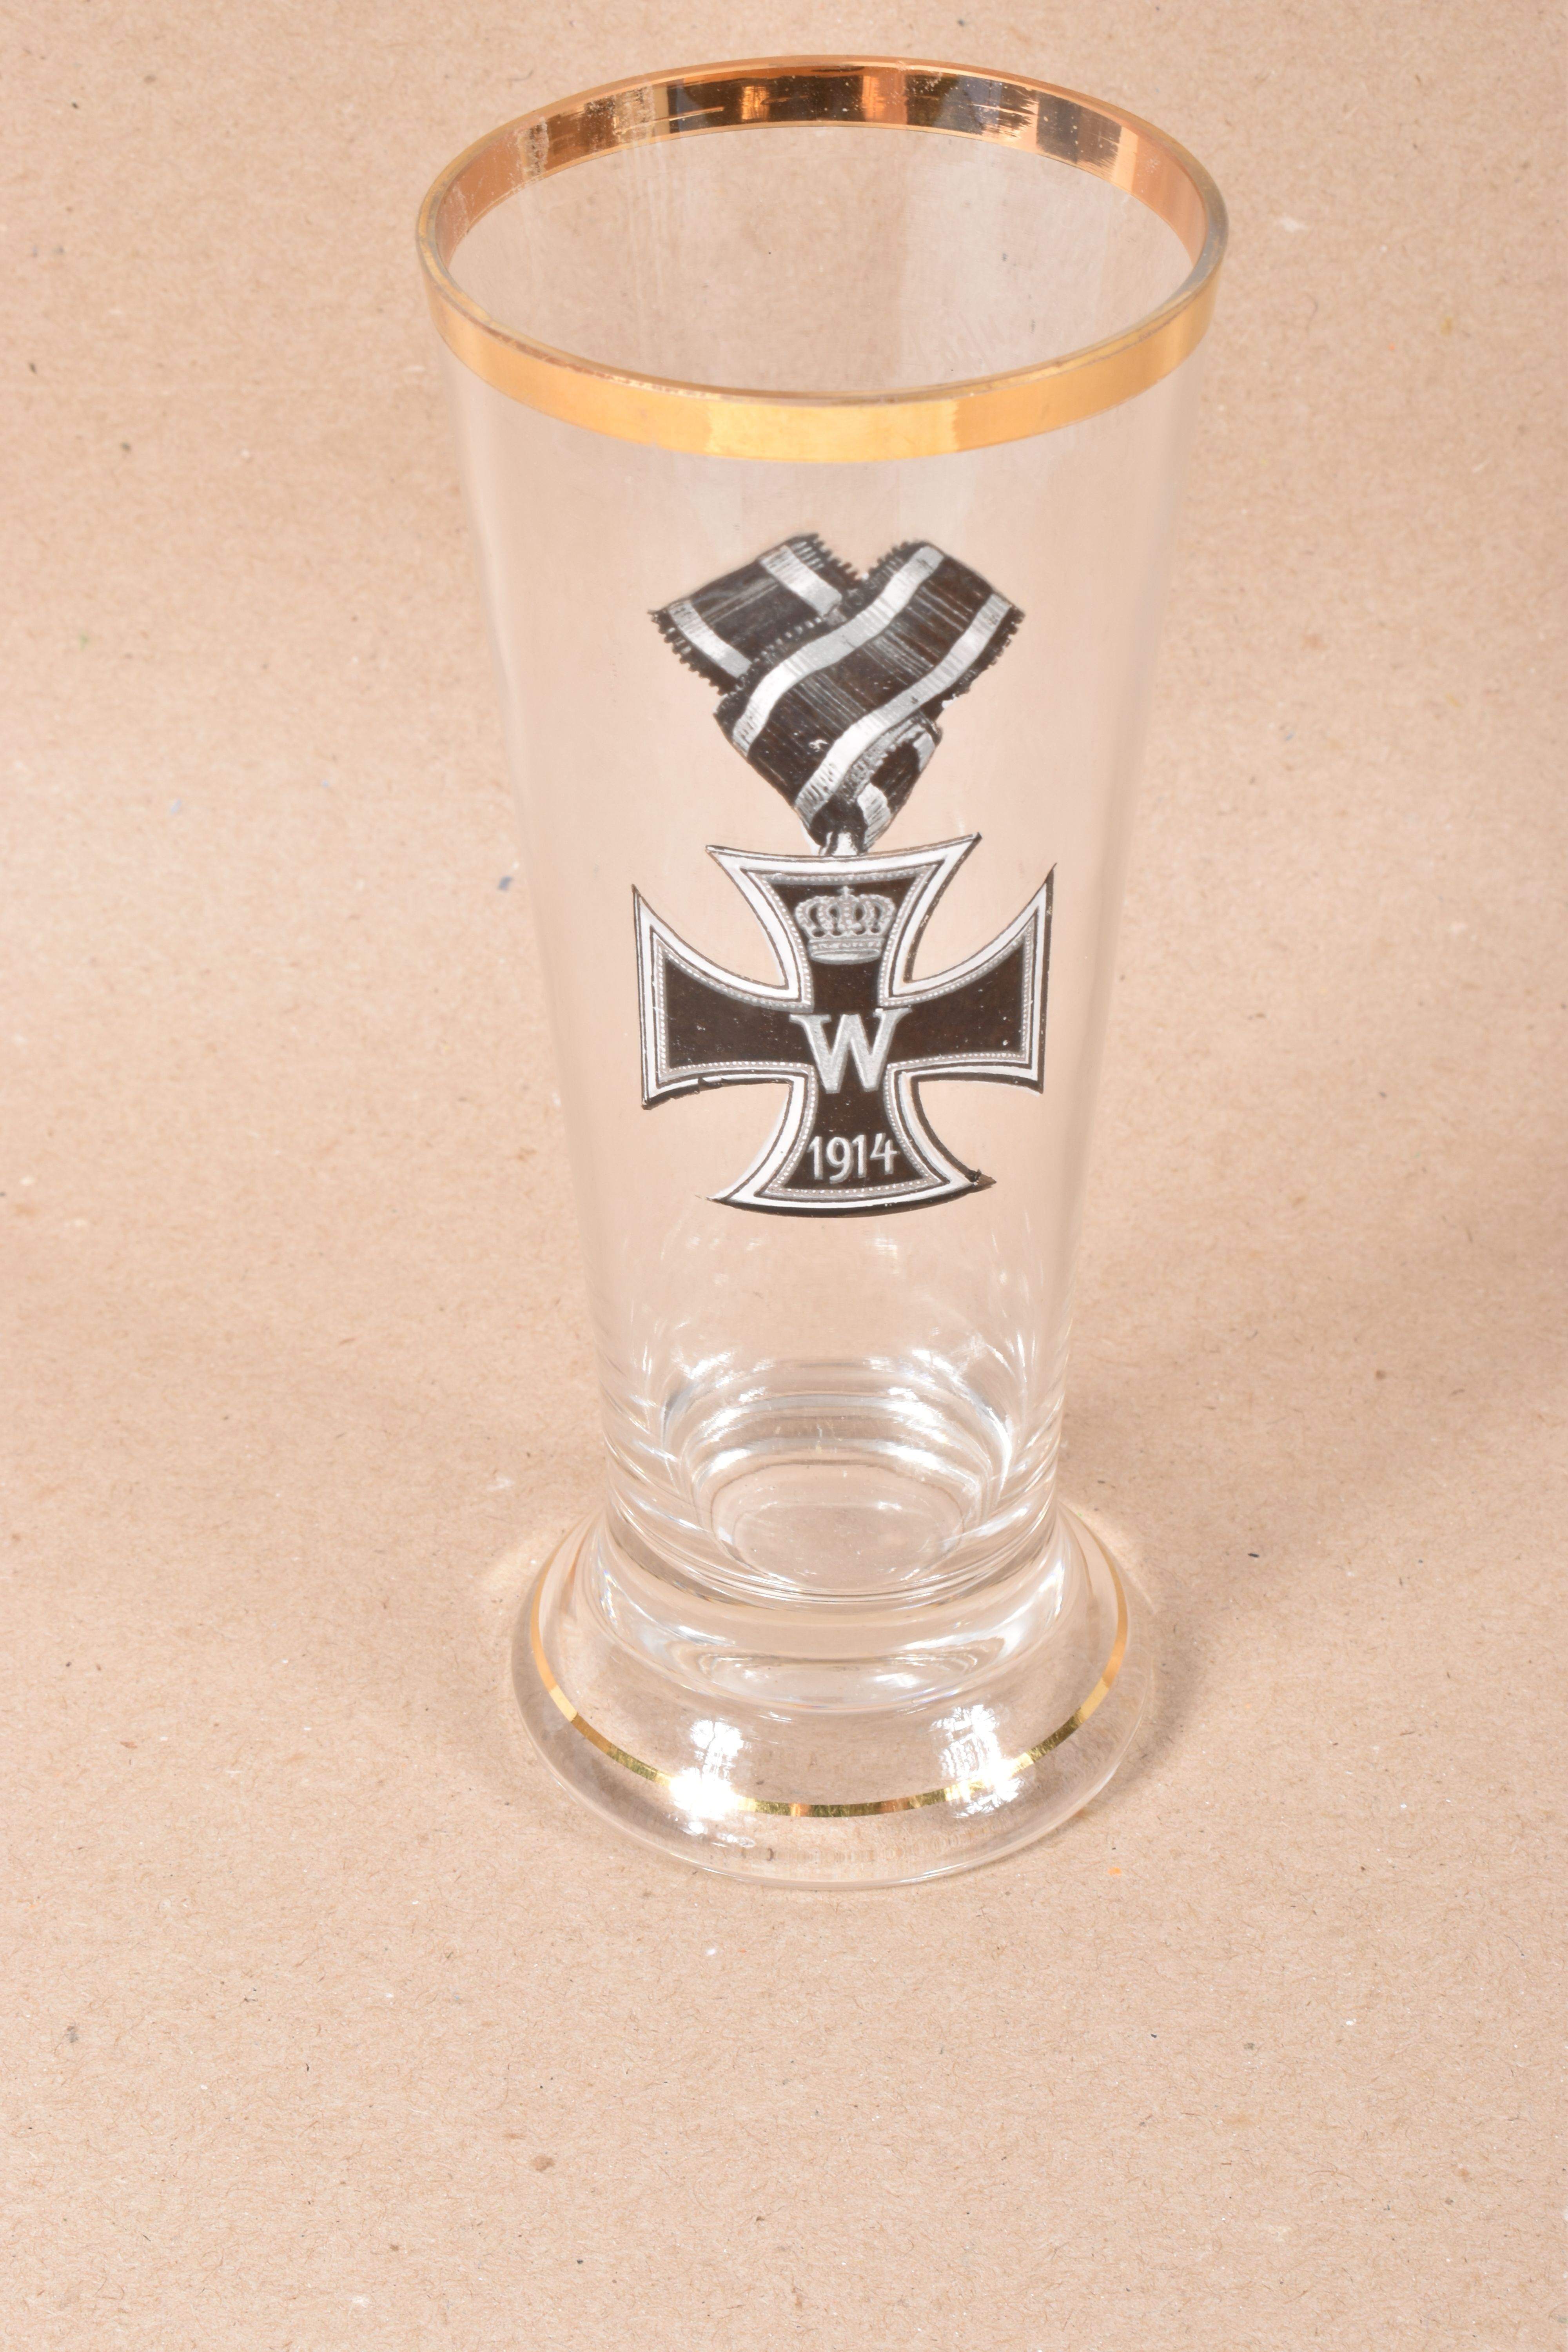 TWO GERMAN WWII WHITE GLAZED CERAMIC BEAKERS AND A LATER DRINKING GLASS DECORATED WITH AN WWI - Image 8 of 8